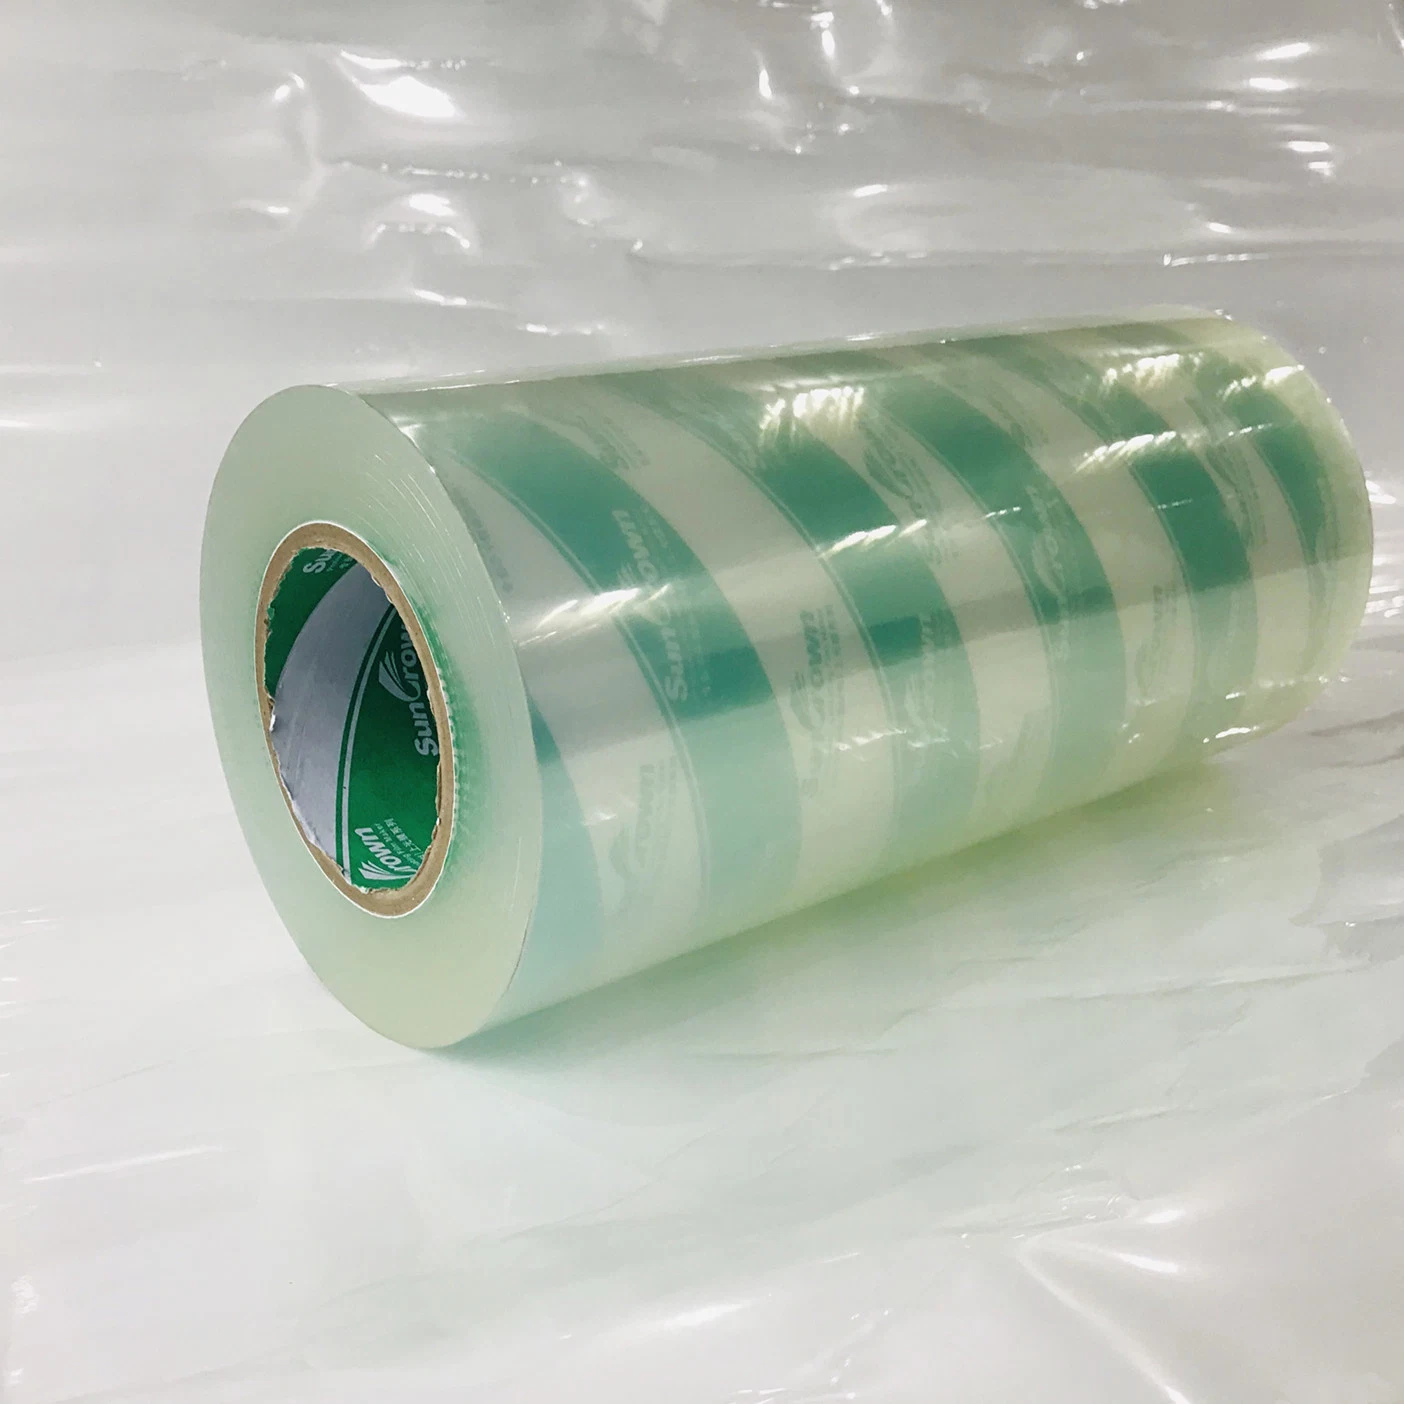 Over Laminating Tape Sp005 with Scaling The Oil-Solution Glue for Printed Adhesive Paper or Label Material